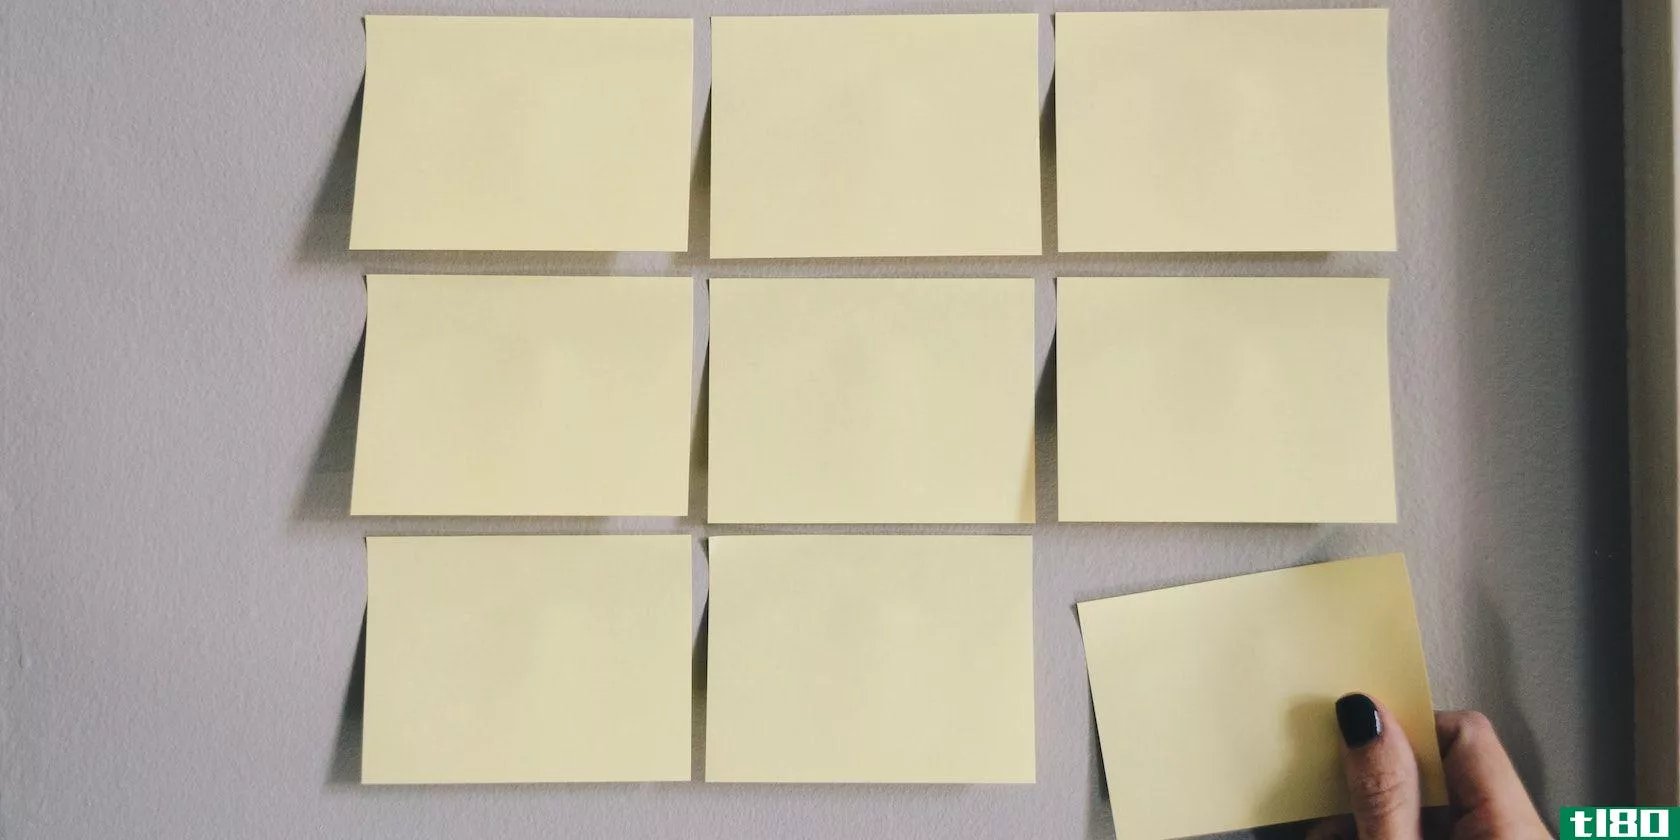 A grid of yellow sticky notes with a hand removing the lower right note